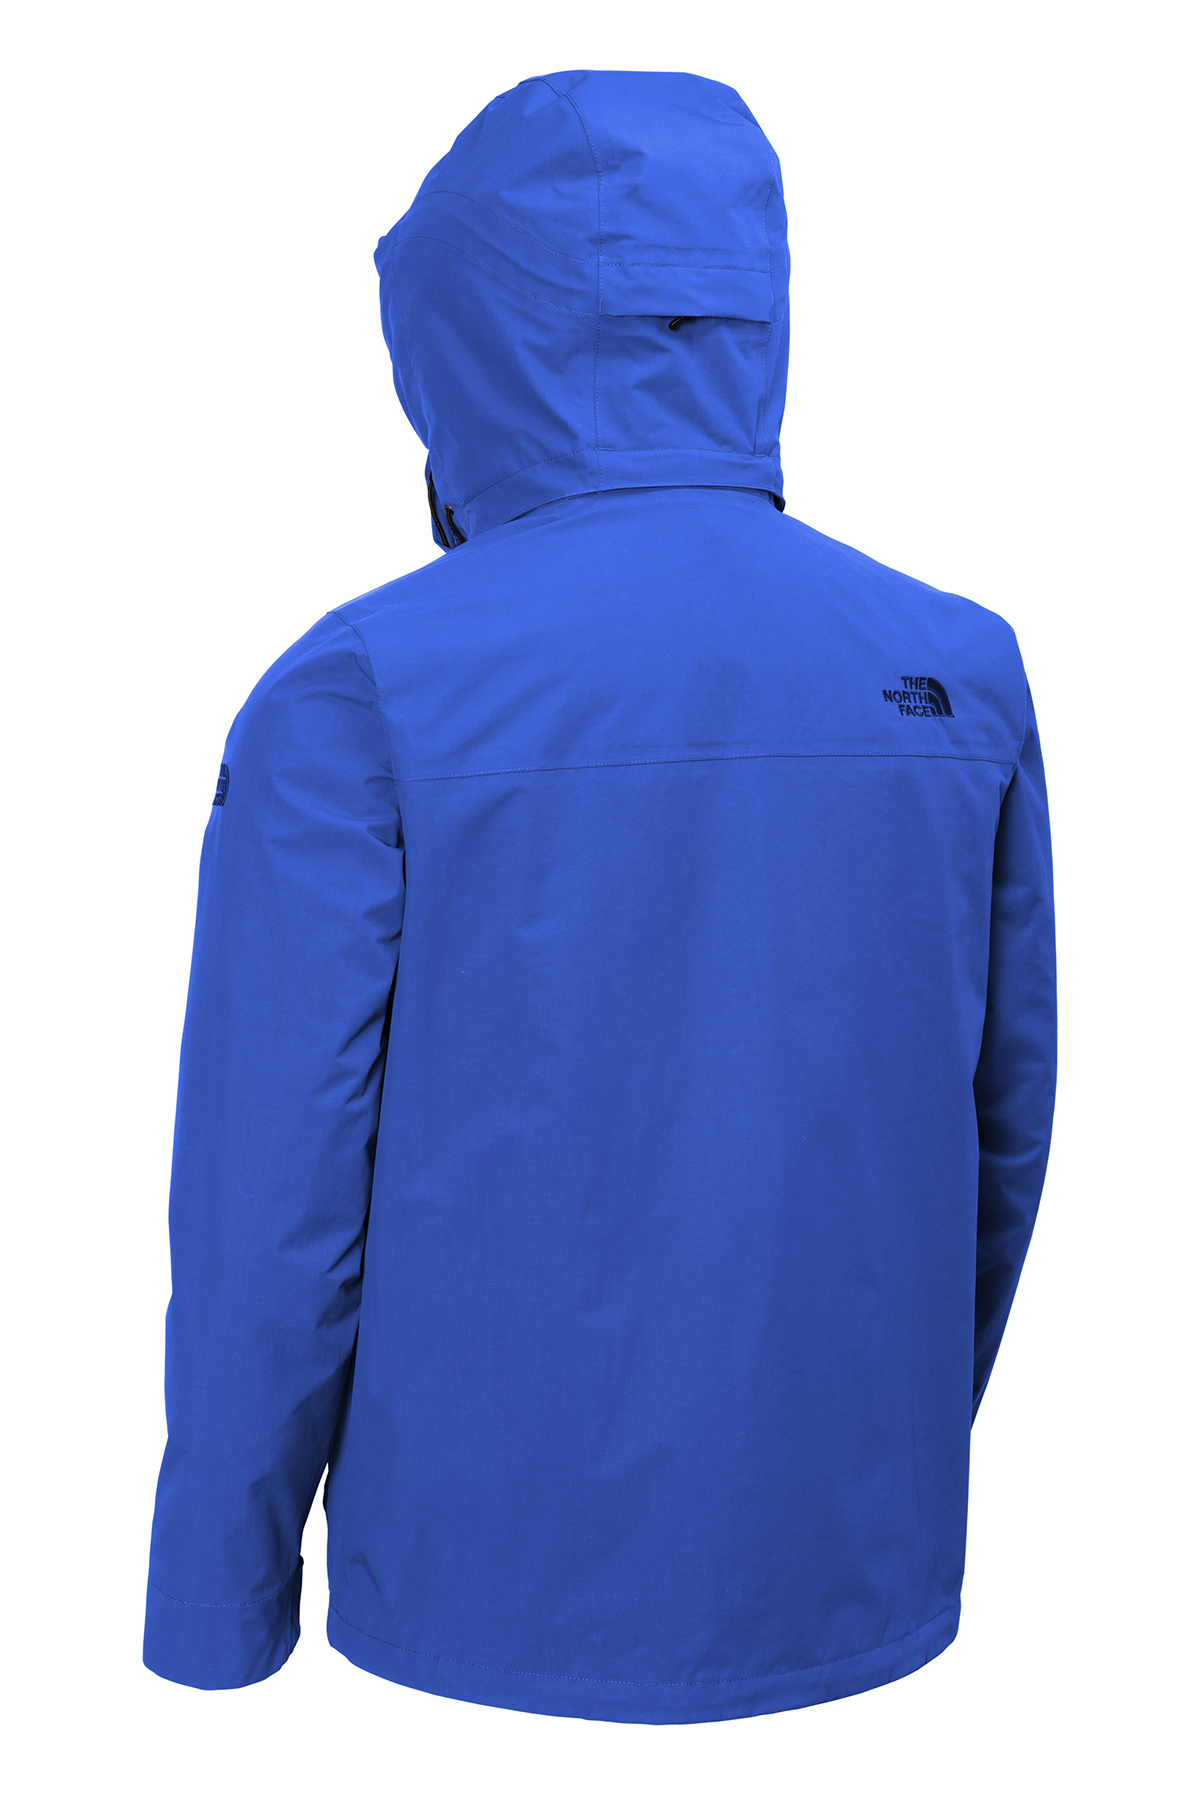 The North Face Traverse Triclimate 3-in-1 Jacket | Product | SanMar